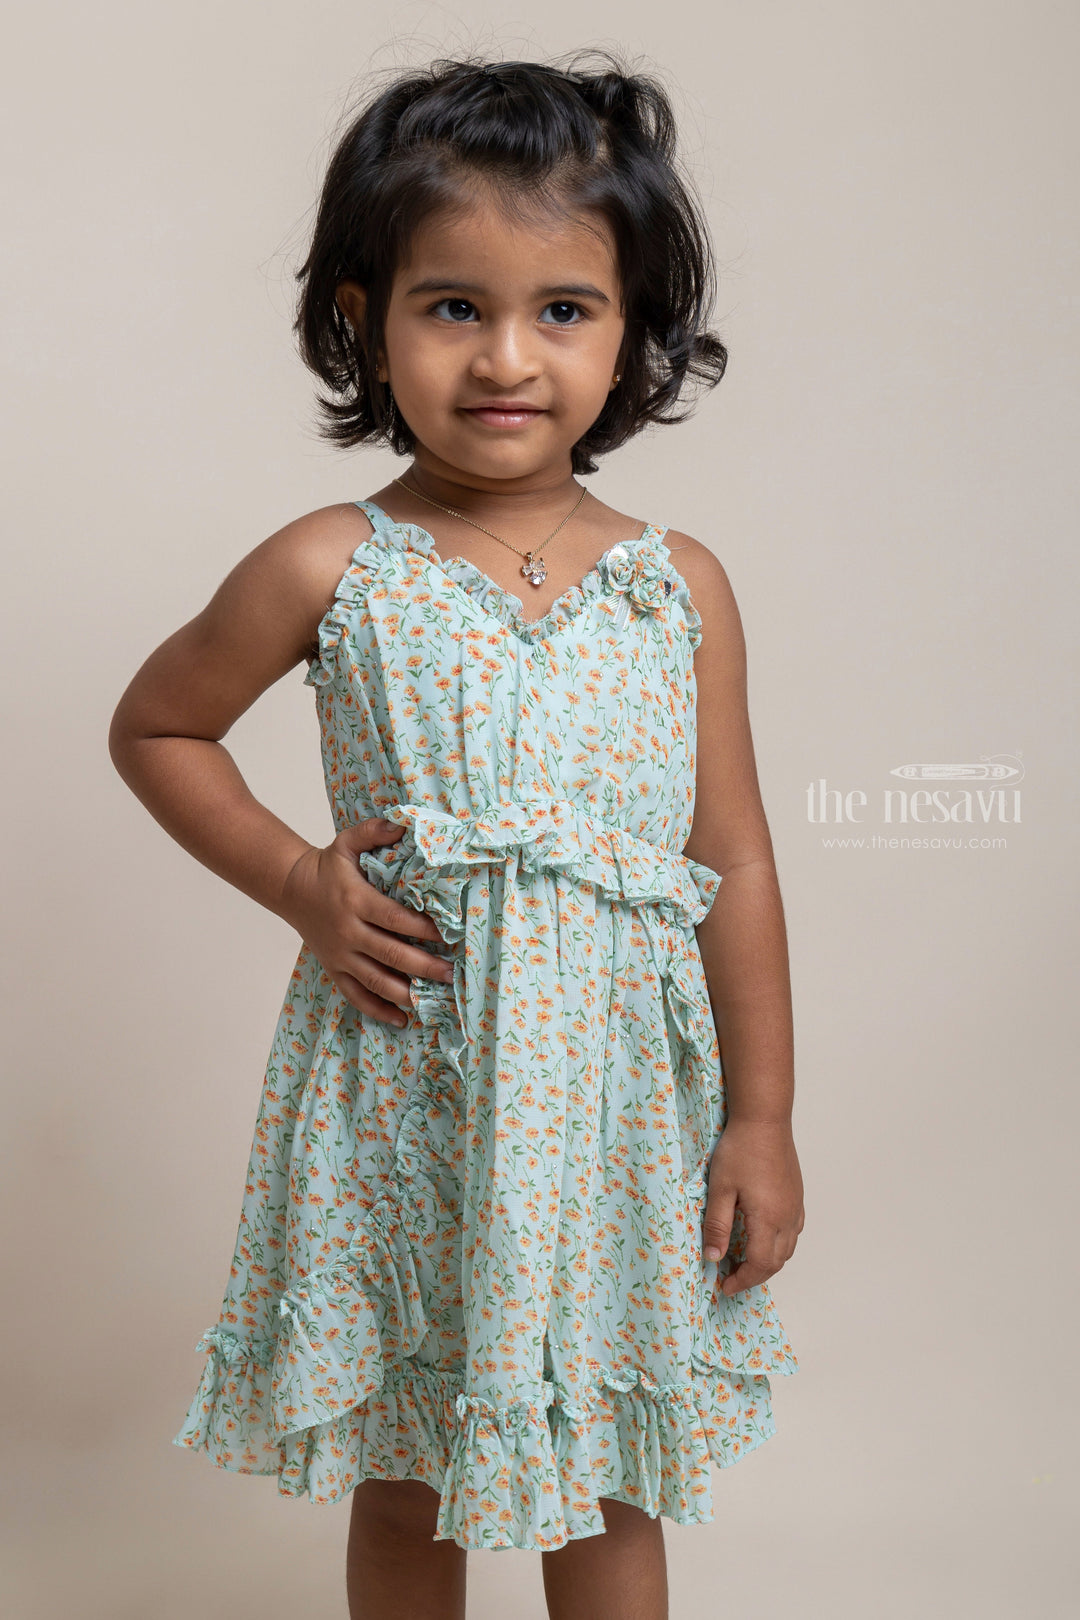 The Nesavu Baby Fancy Frock Charming Green Floral Printed Ruffled Chiffon Frock For baby girls Nesavu Baby girl cotton frocks | Latest Collection For Baby Frocks | The Nesavu